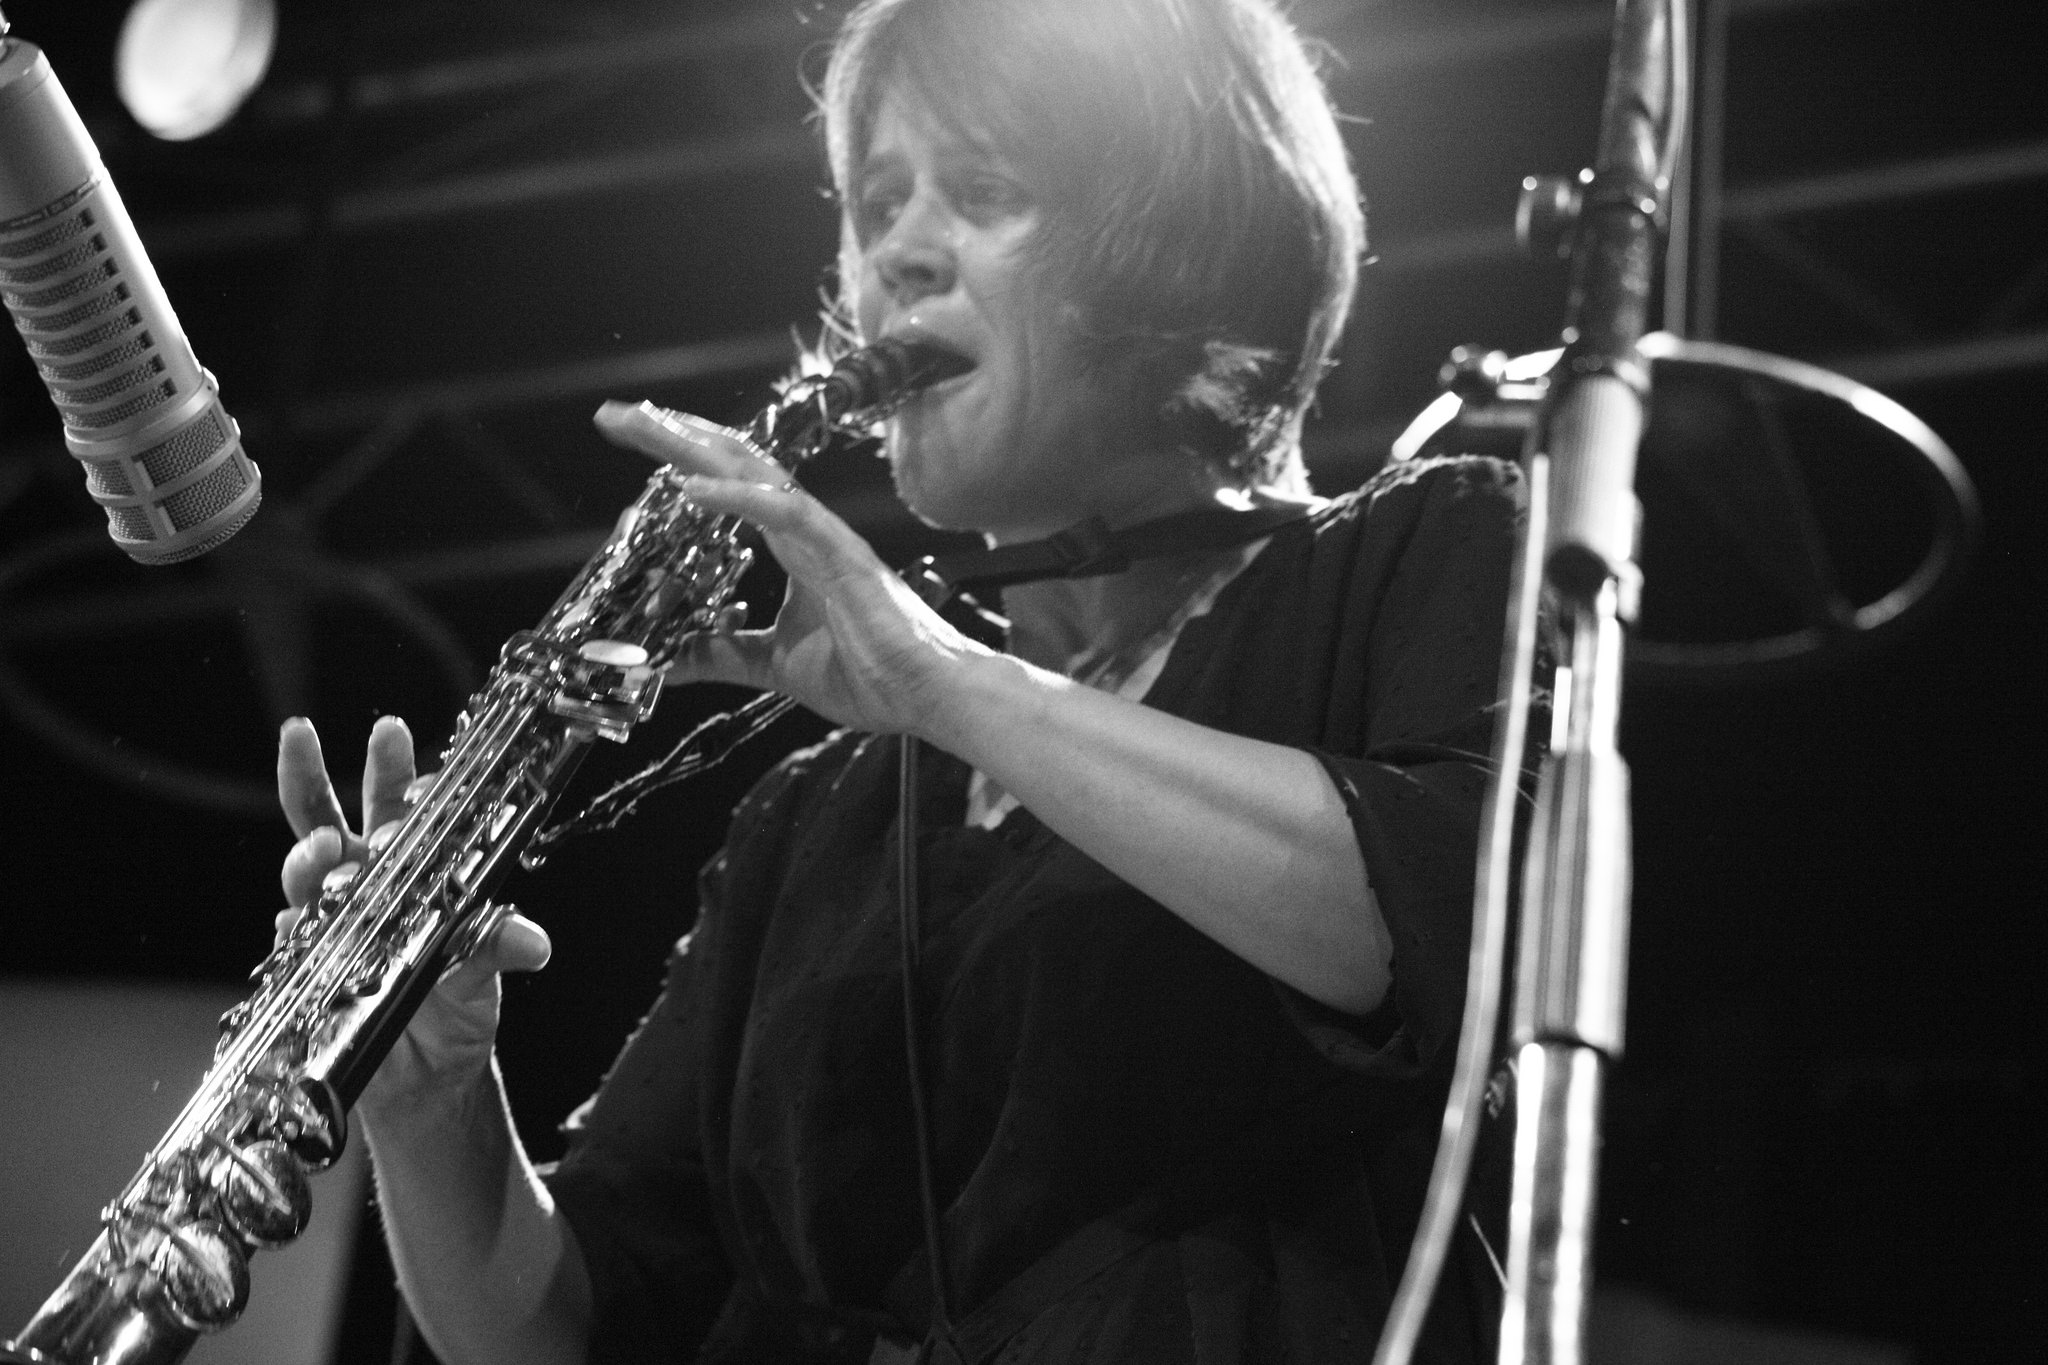 Live Jazz Photography - Ingrid Laubrock at Wels (Unlimited #30)